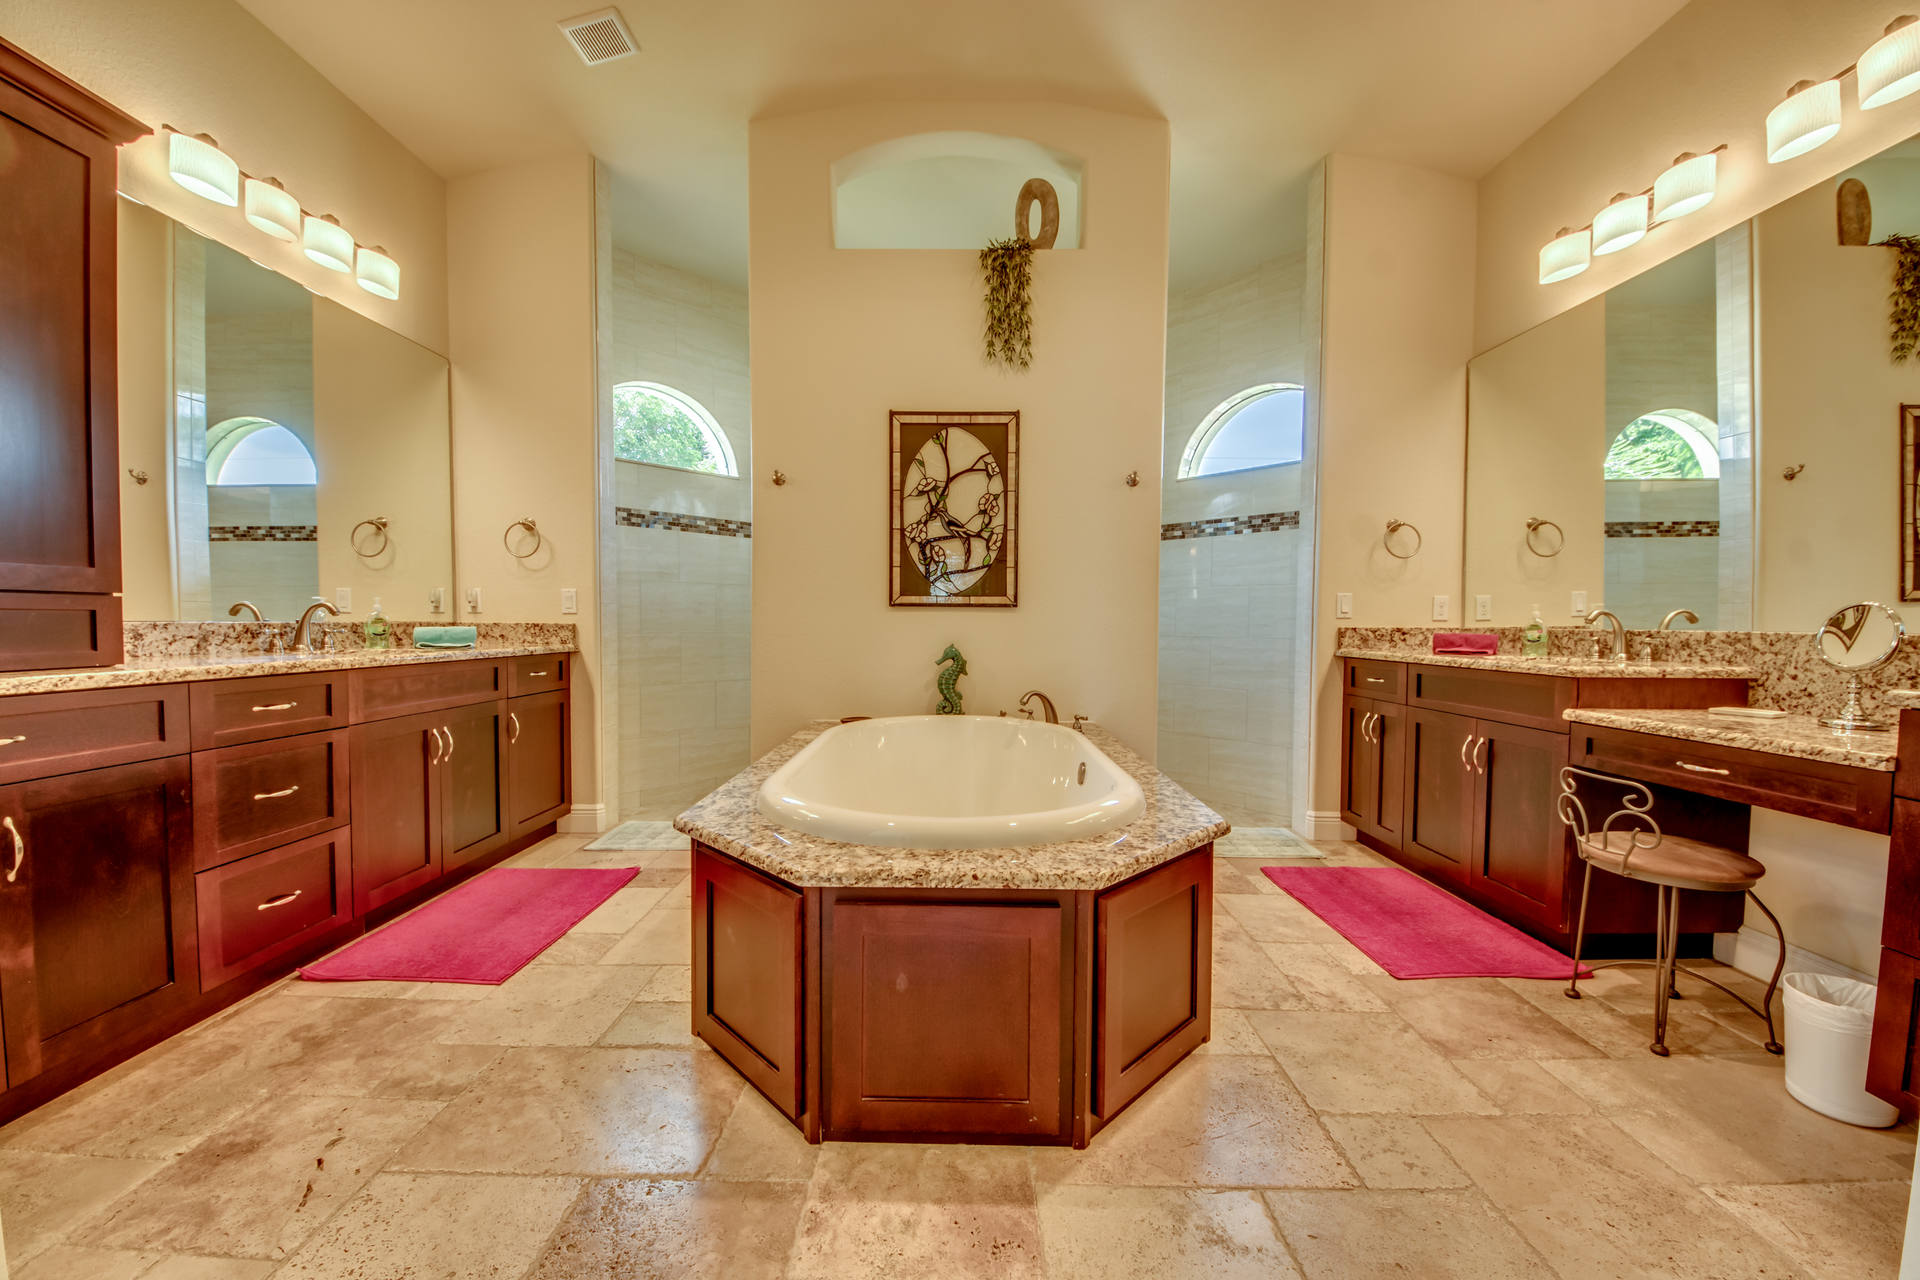 Bathrooms in the rental home